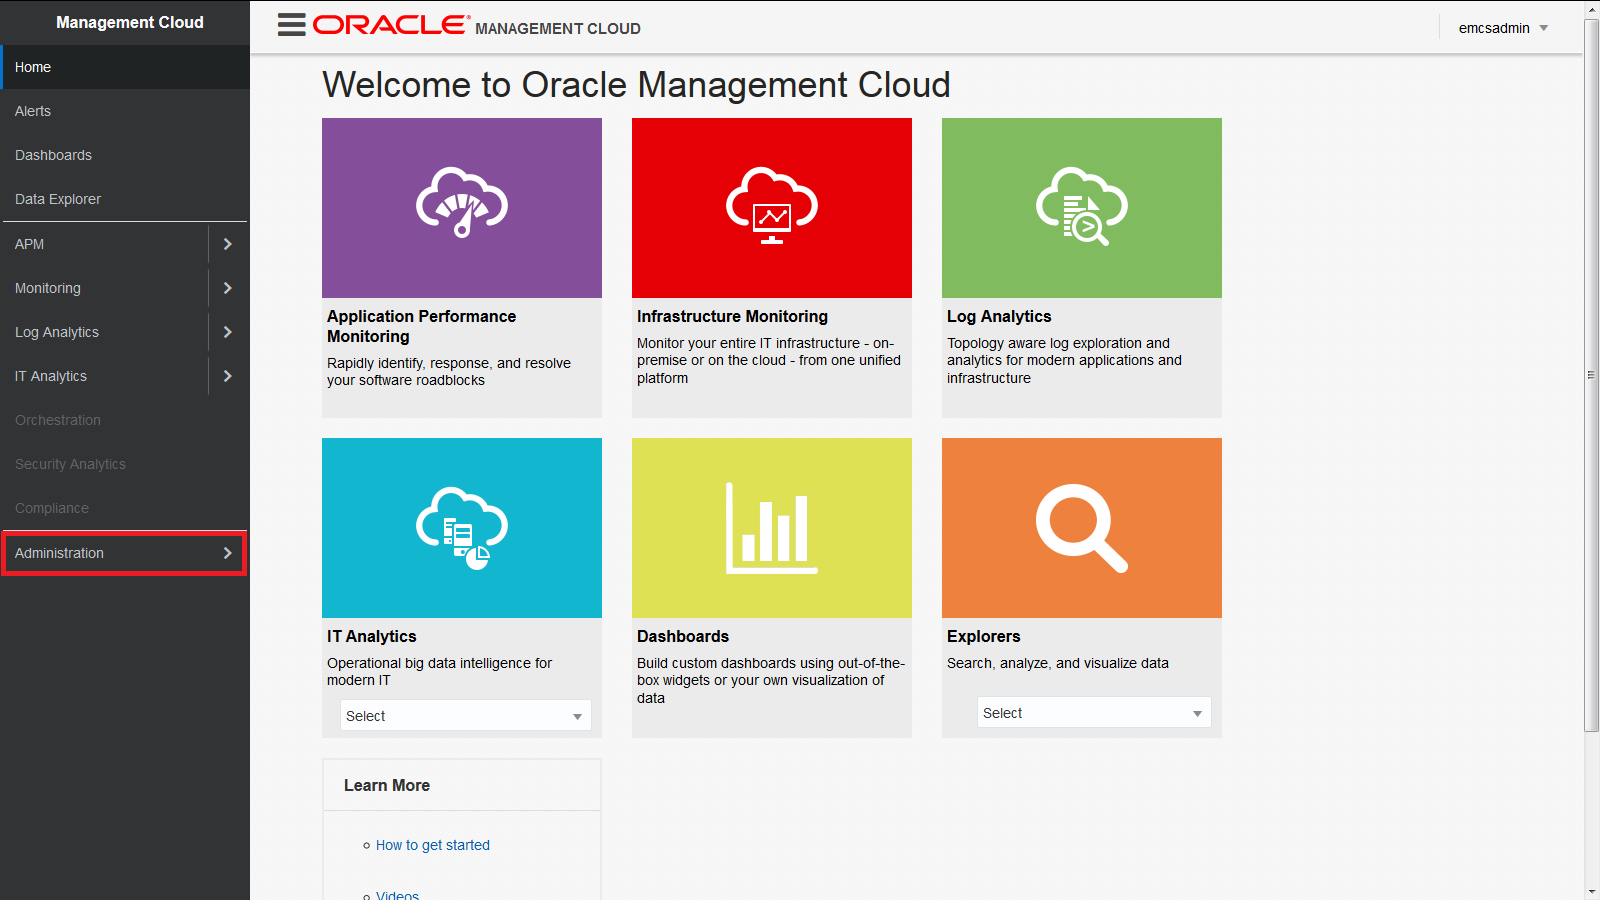 This image shows the main page for Oracle Management Cloud, with the Administration page highlighted.